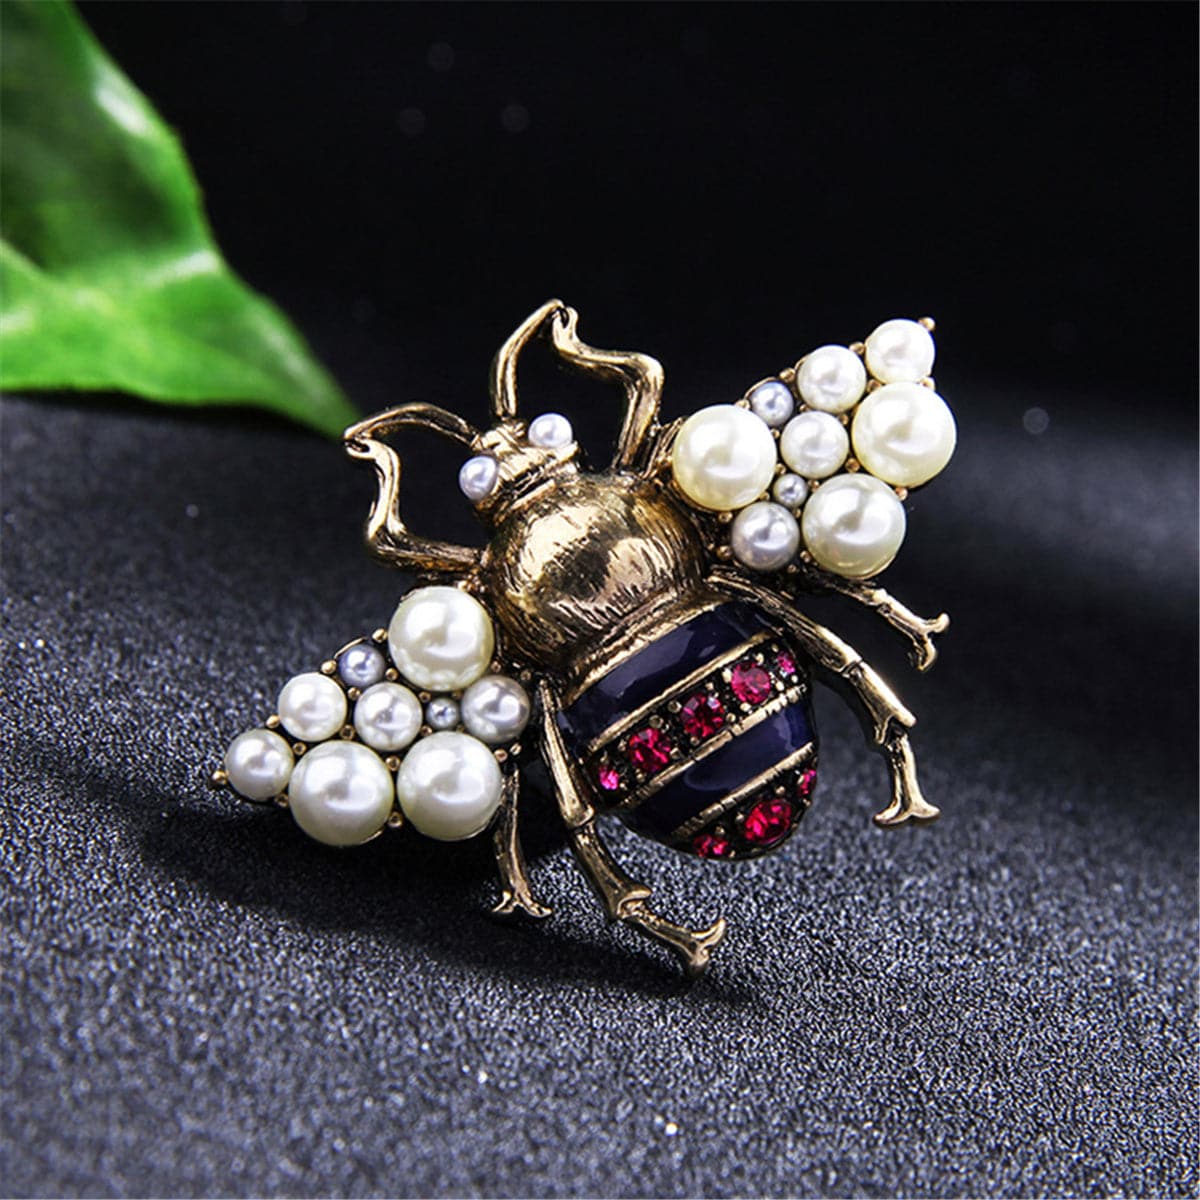 Pearl & Red Cubic Zirconia 18k Gold-Plated Insect Brooch